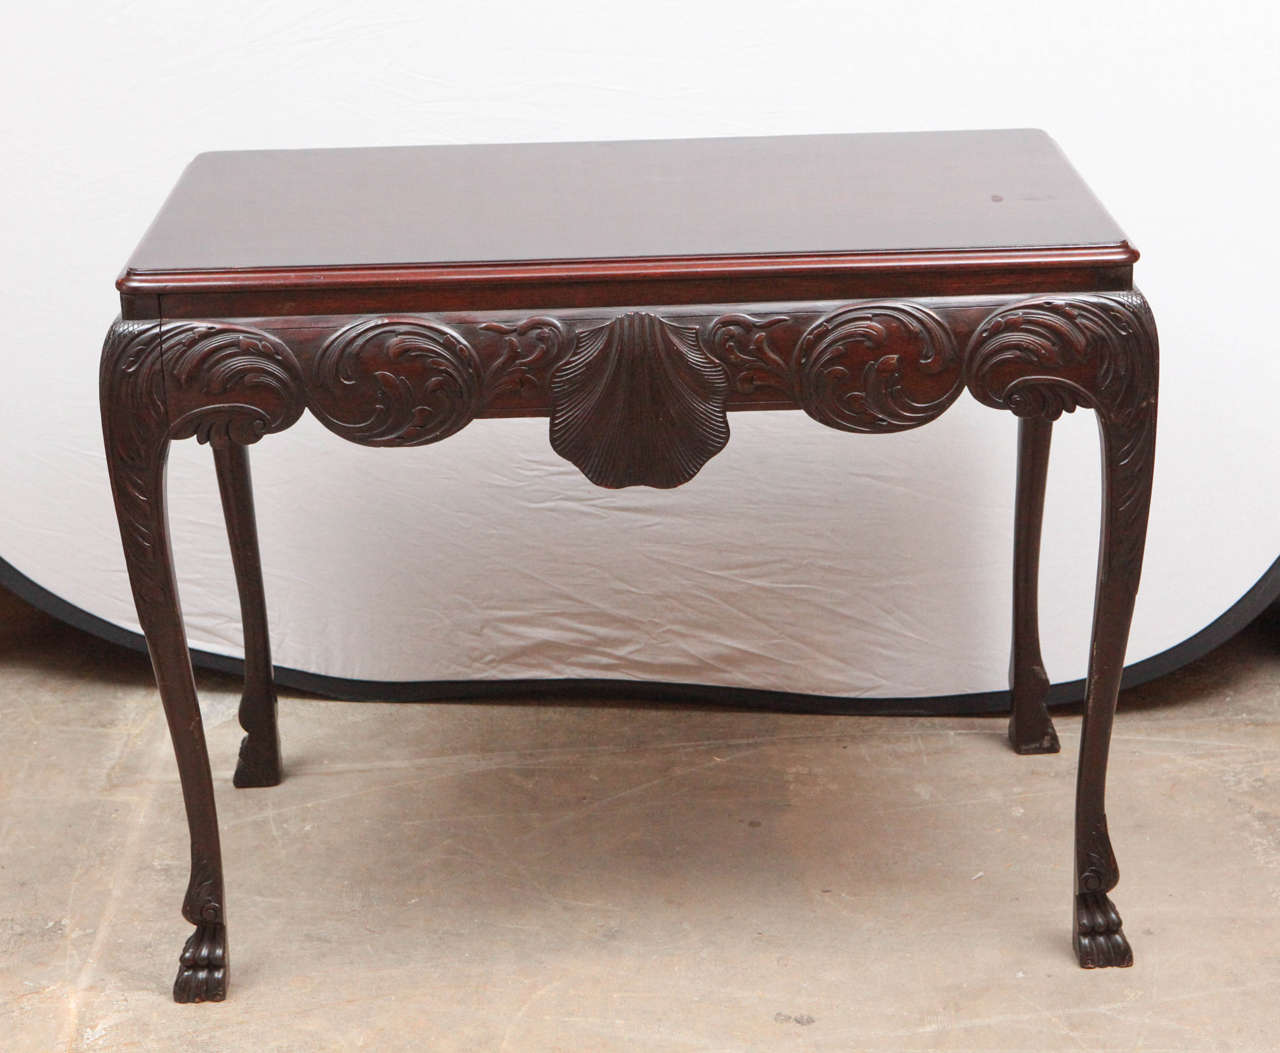 Carved 19th Century English Mahogany Console Table with Single Drawer